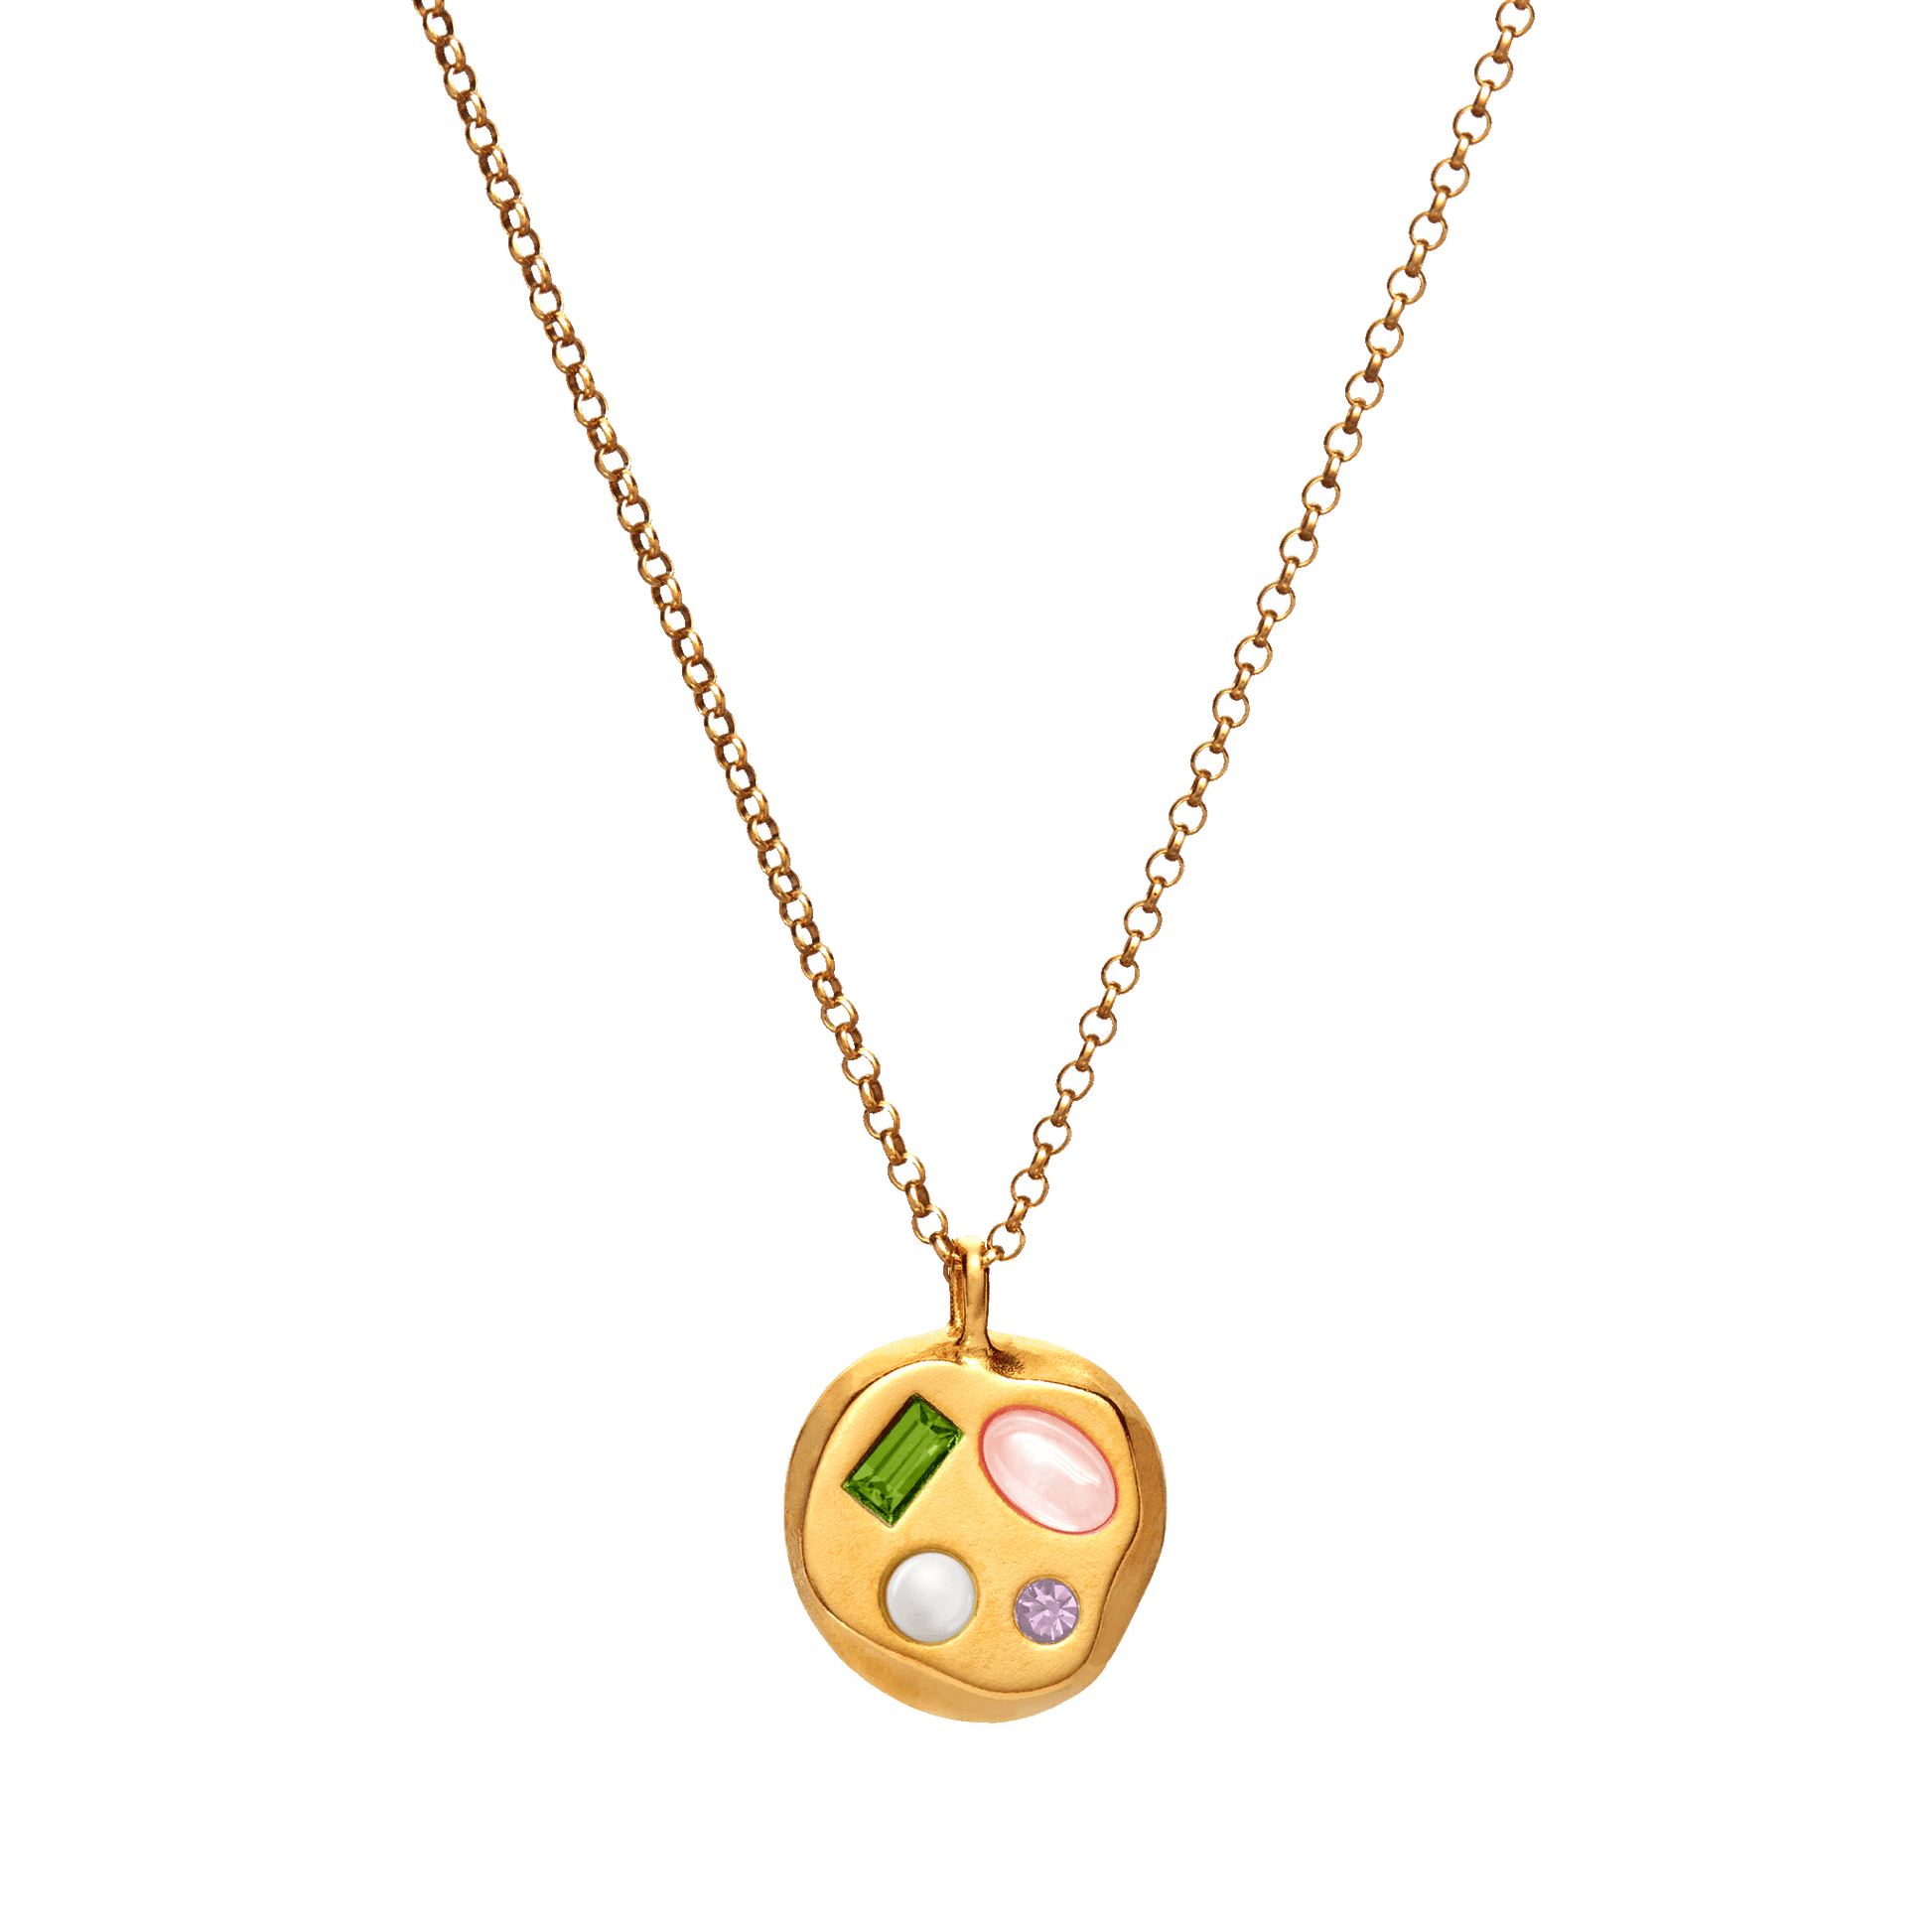 The August Ninth Pendant